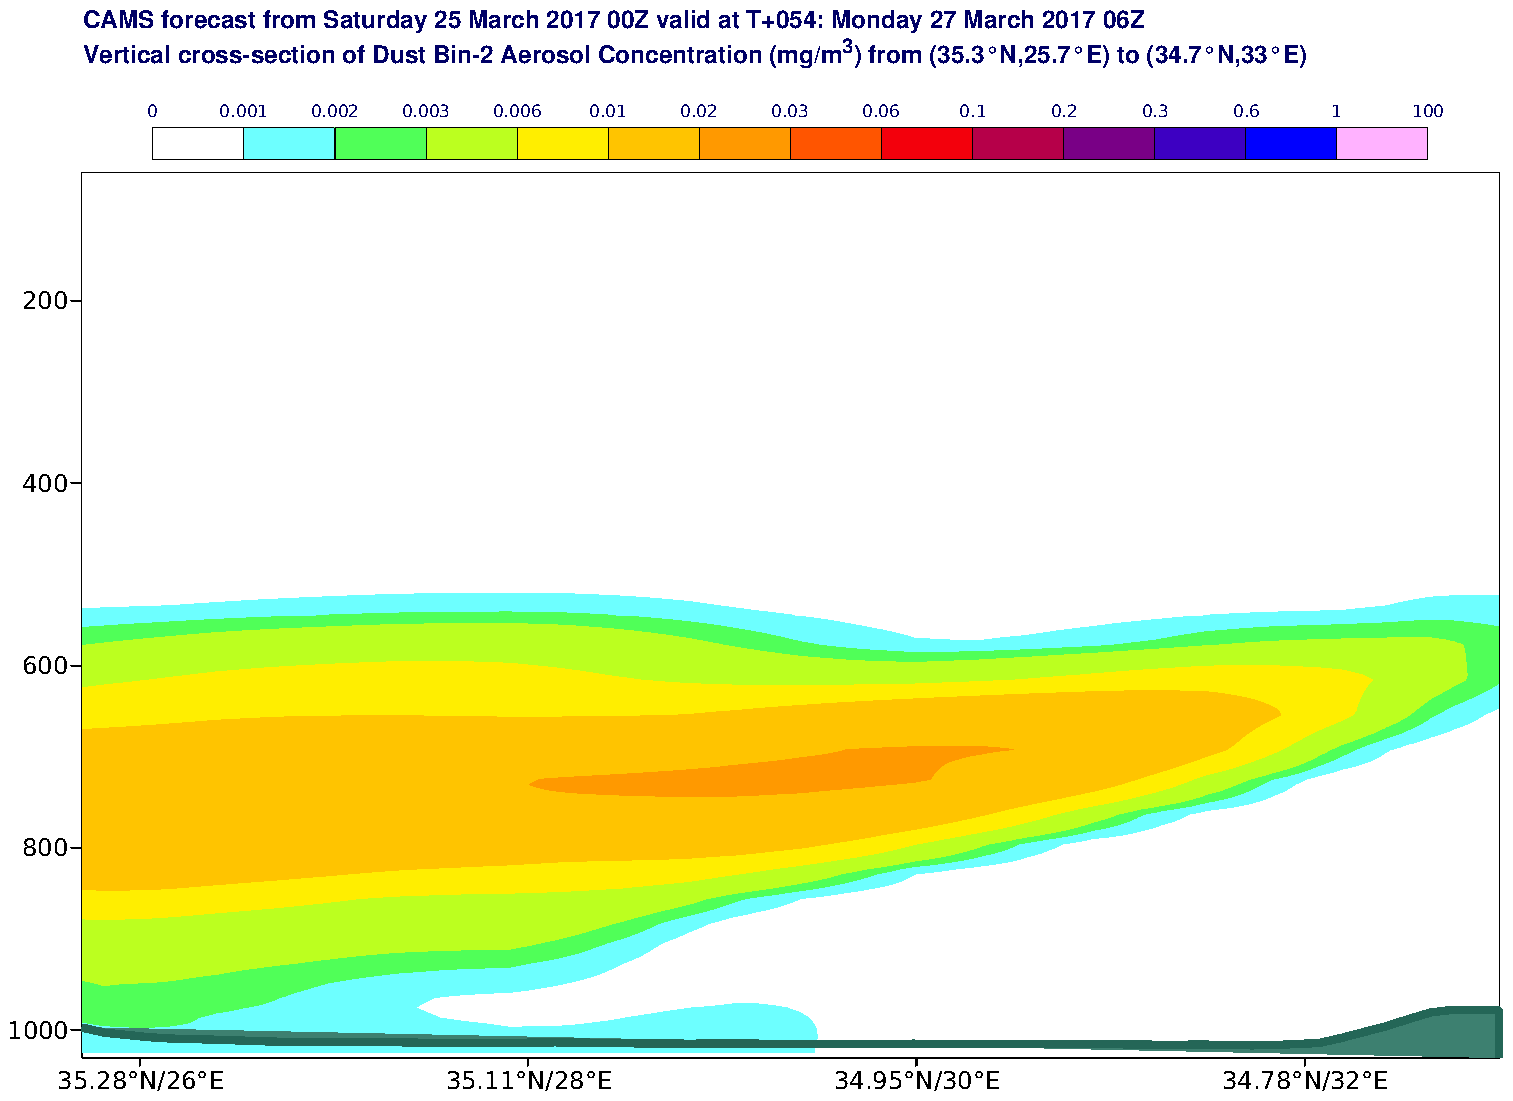 Vertical cross-section of Dust Bin-2 Aerosol Concentration (mg/m3) valid at T54 - 2017-03-27 06:00